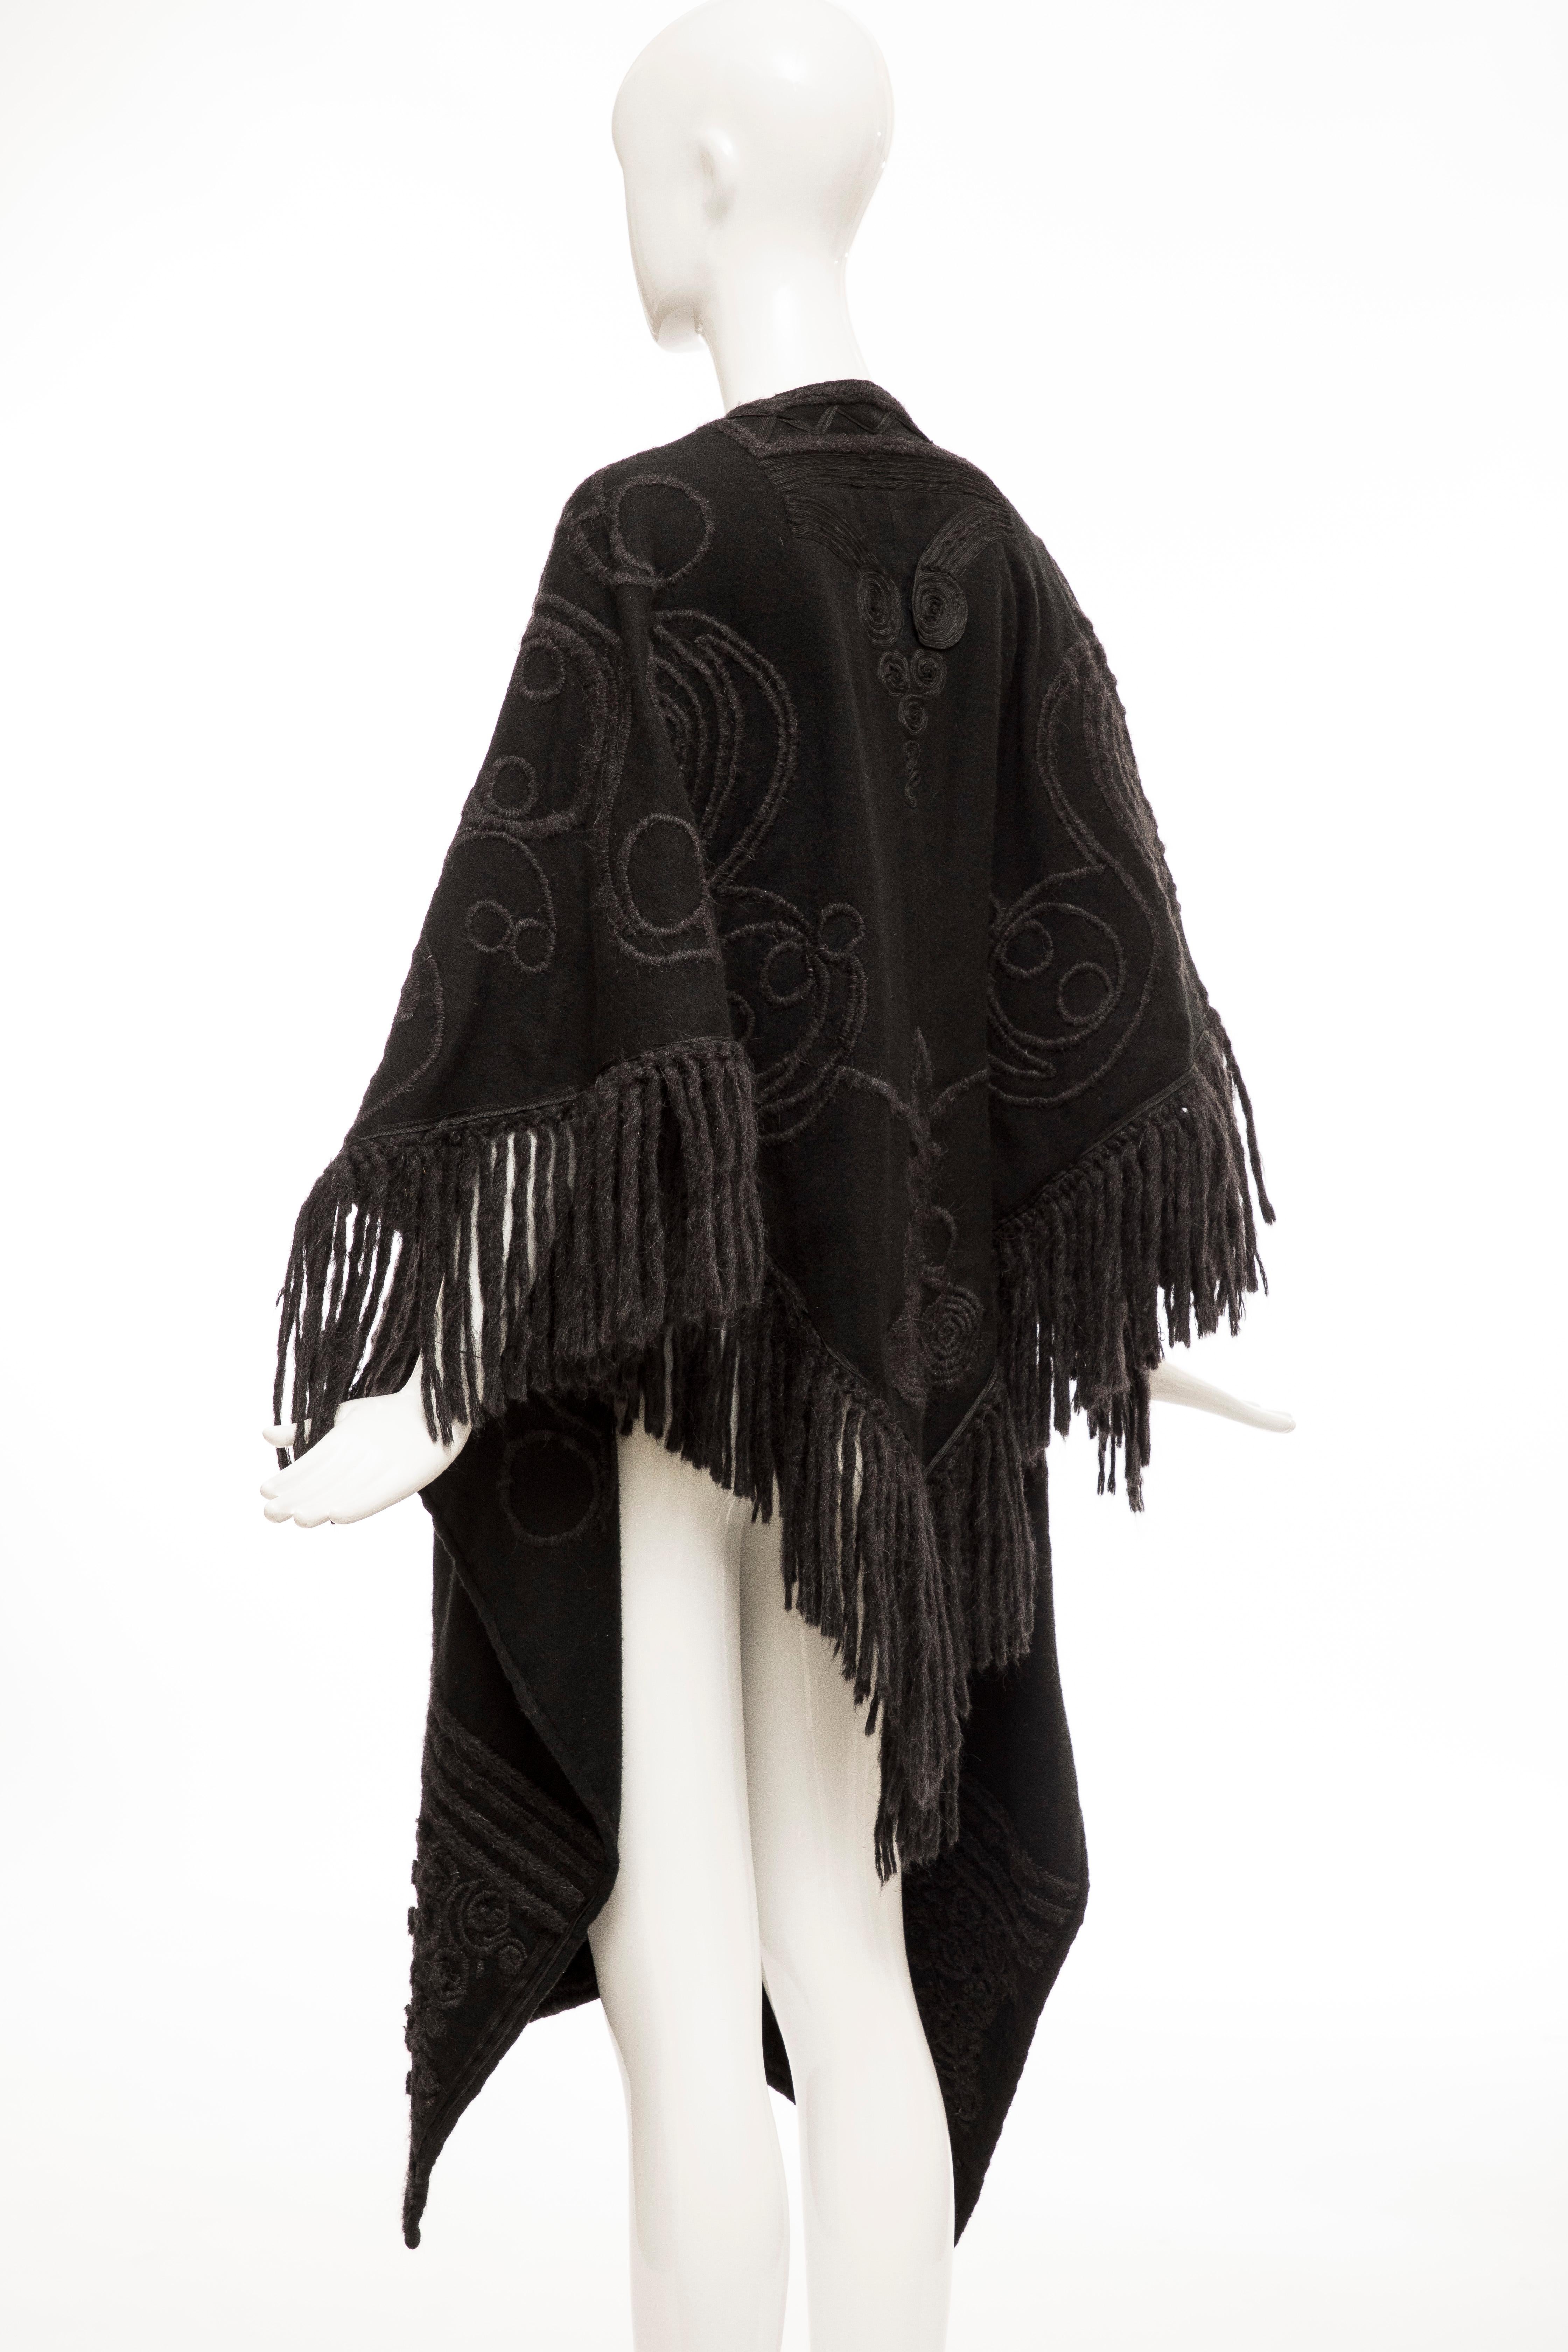 Dries Van Noten Runway Black Wool Embroidered Fringe Cape, Fall 2002 For Sale 5